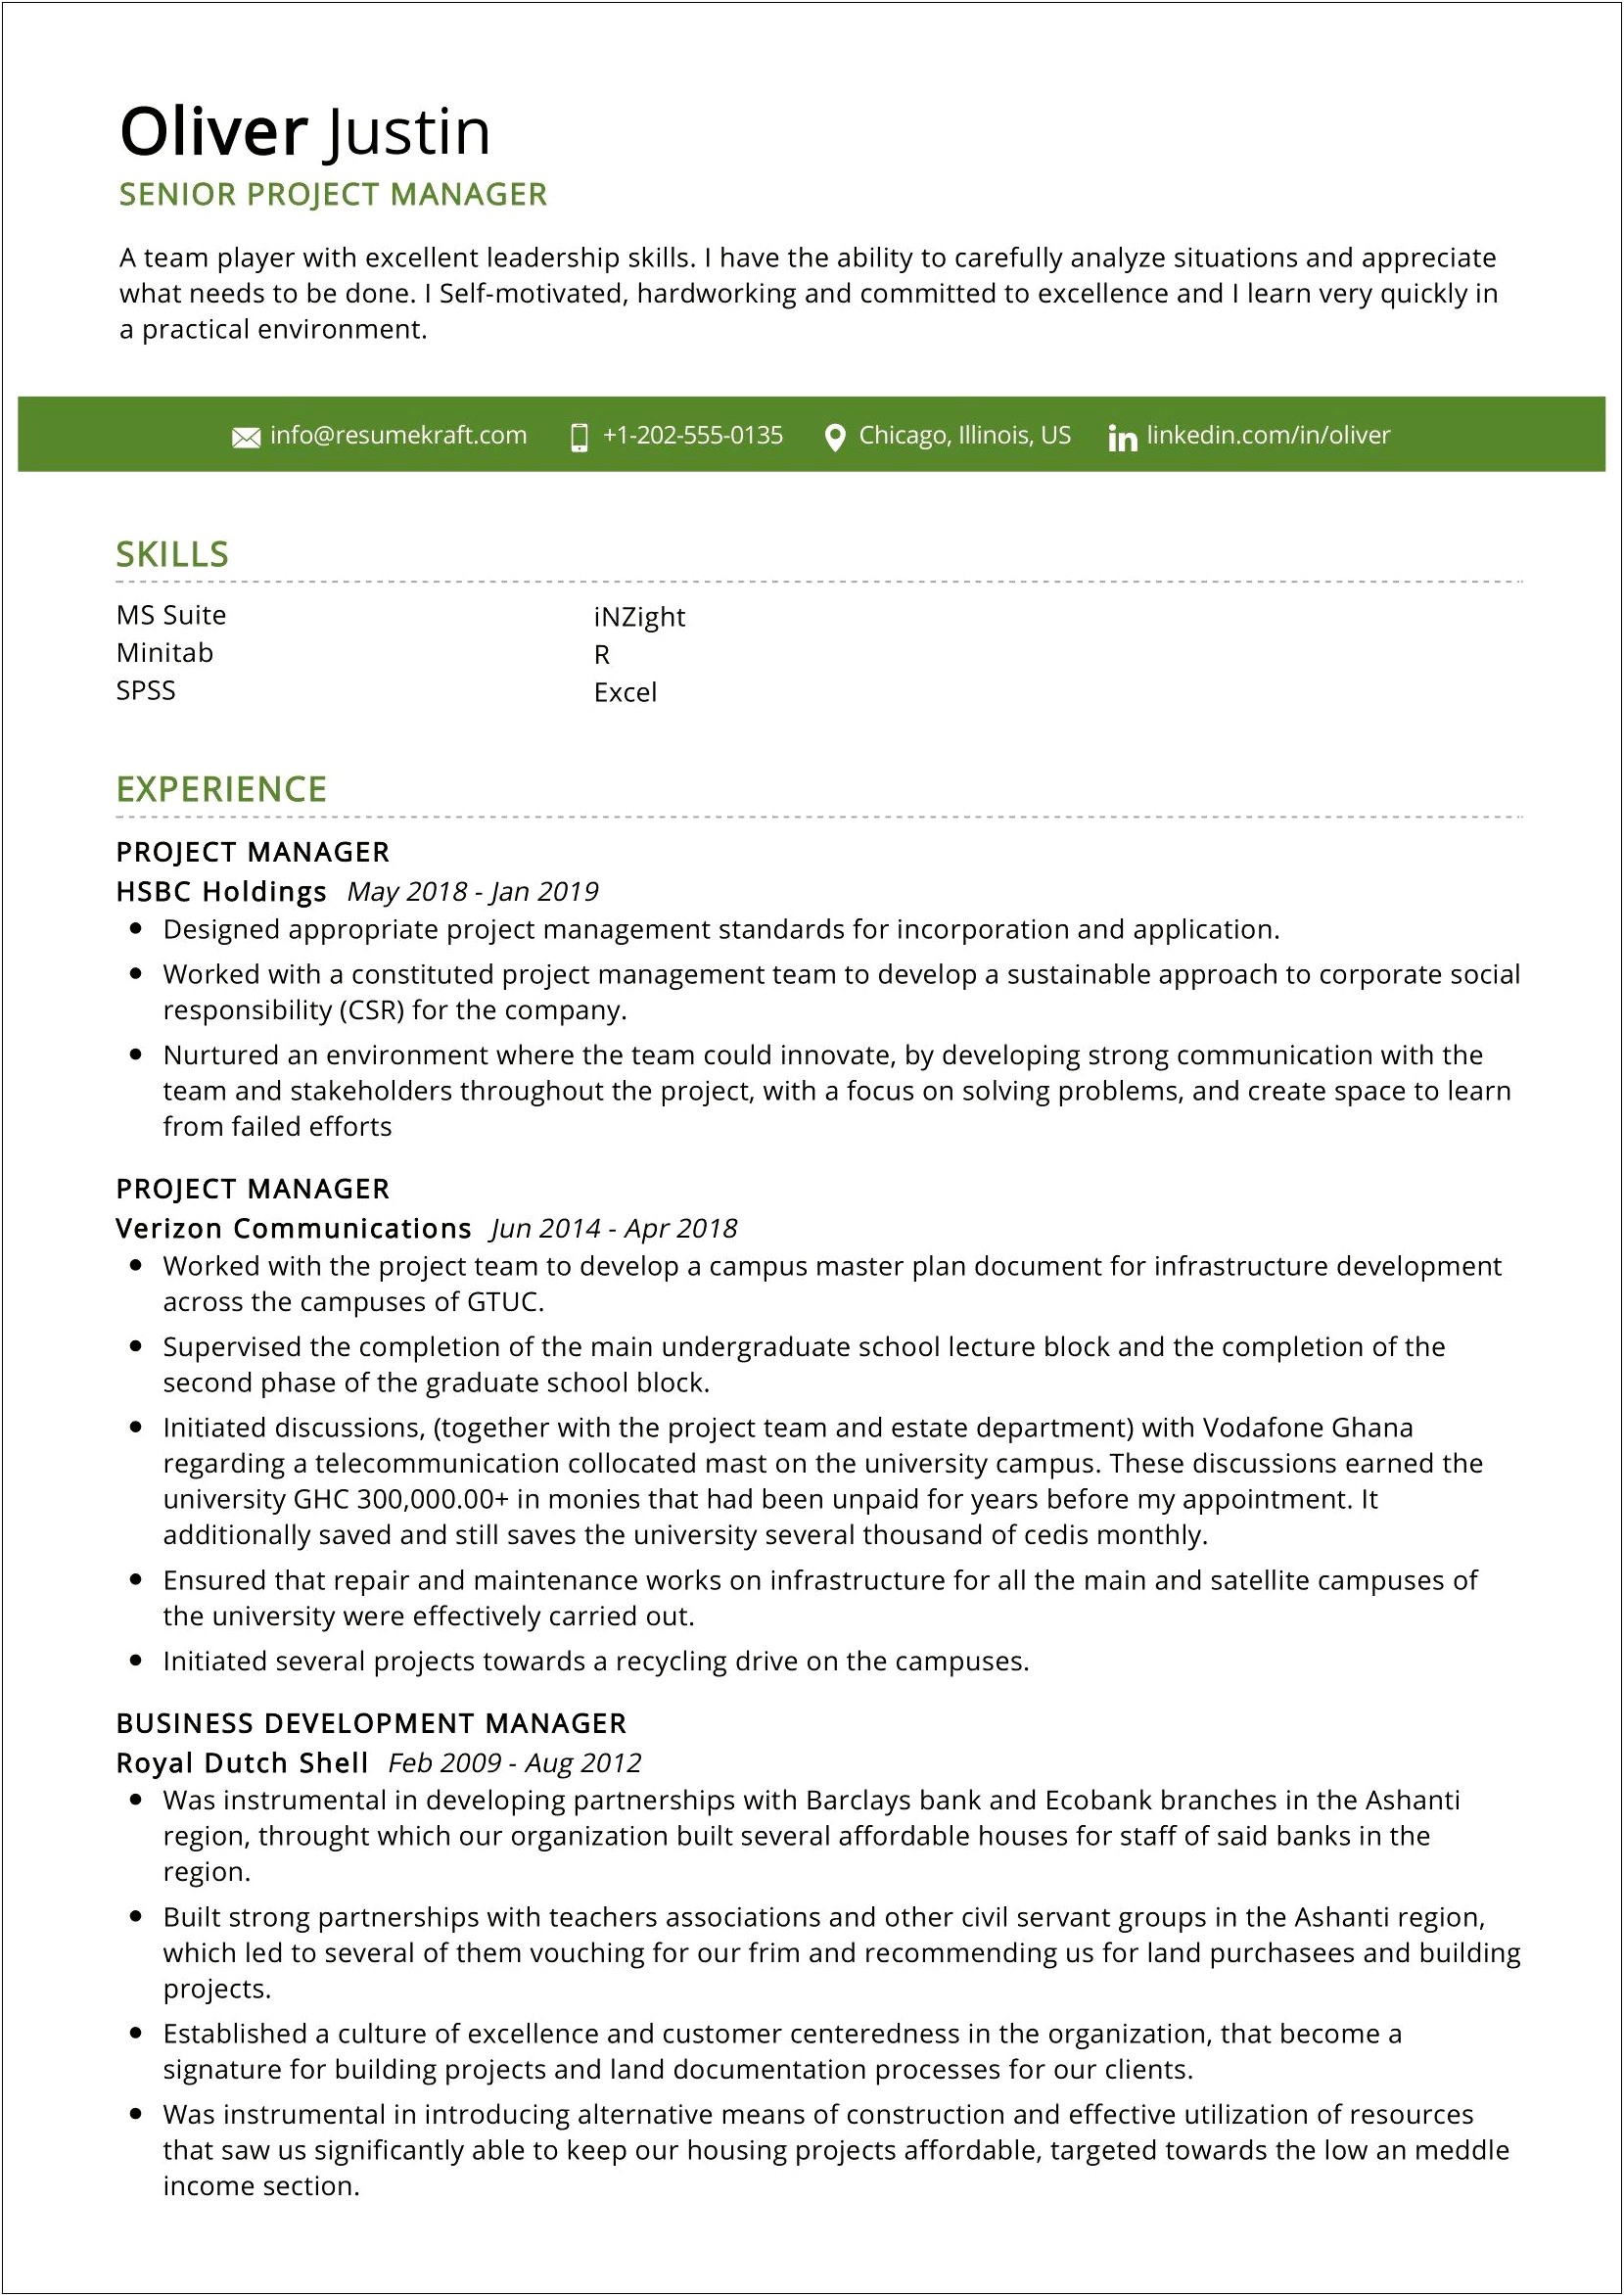 Best Senior Project Manager Resume